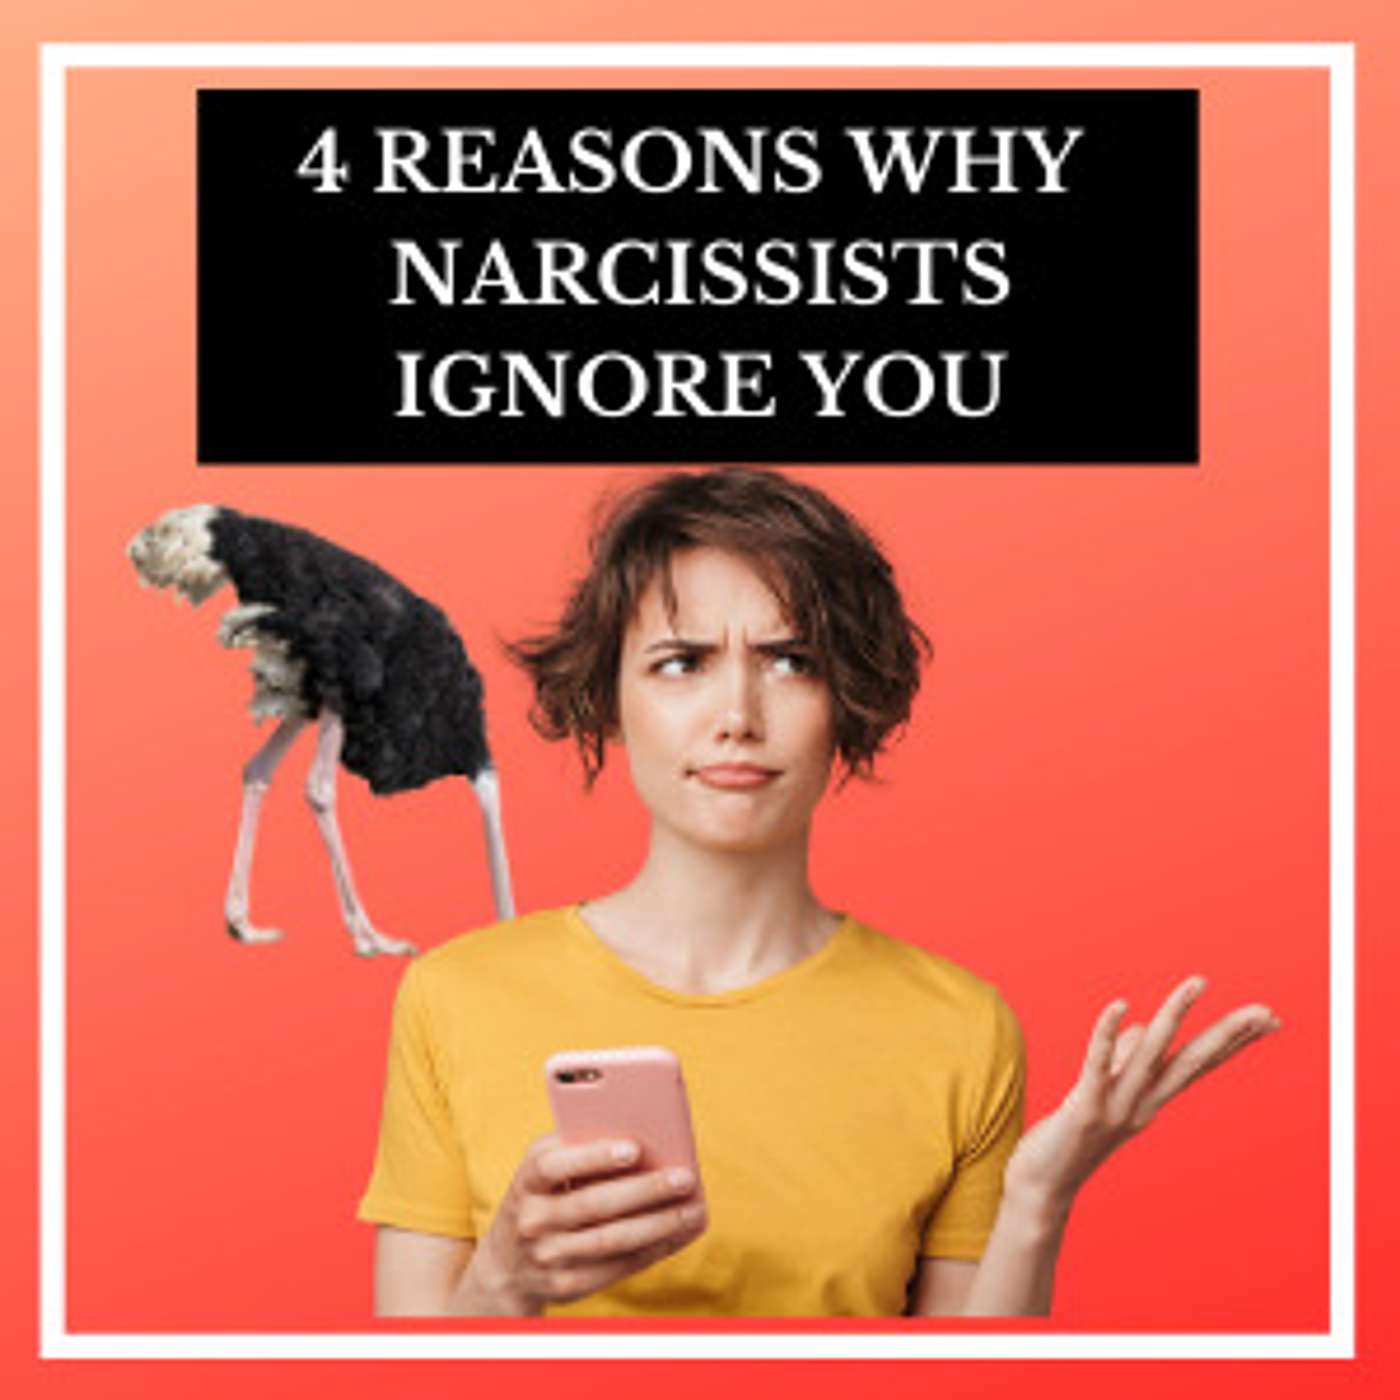 4 Reasons Why Narcissists Ignore You